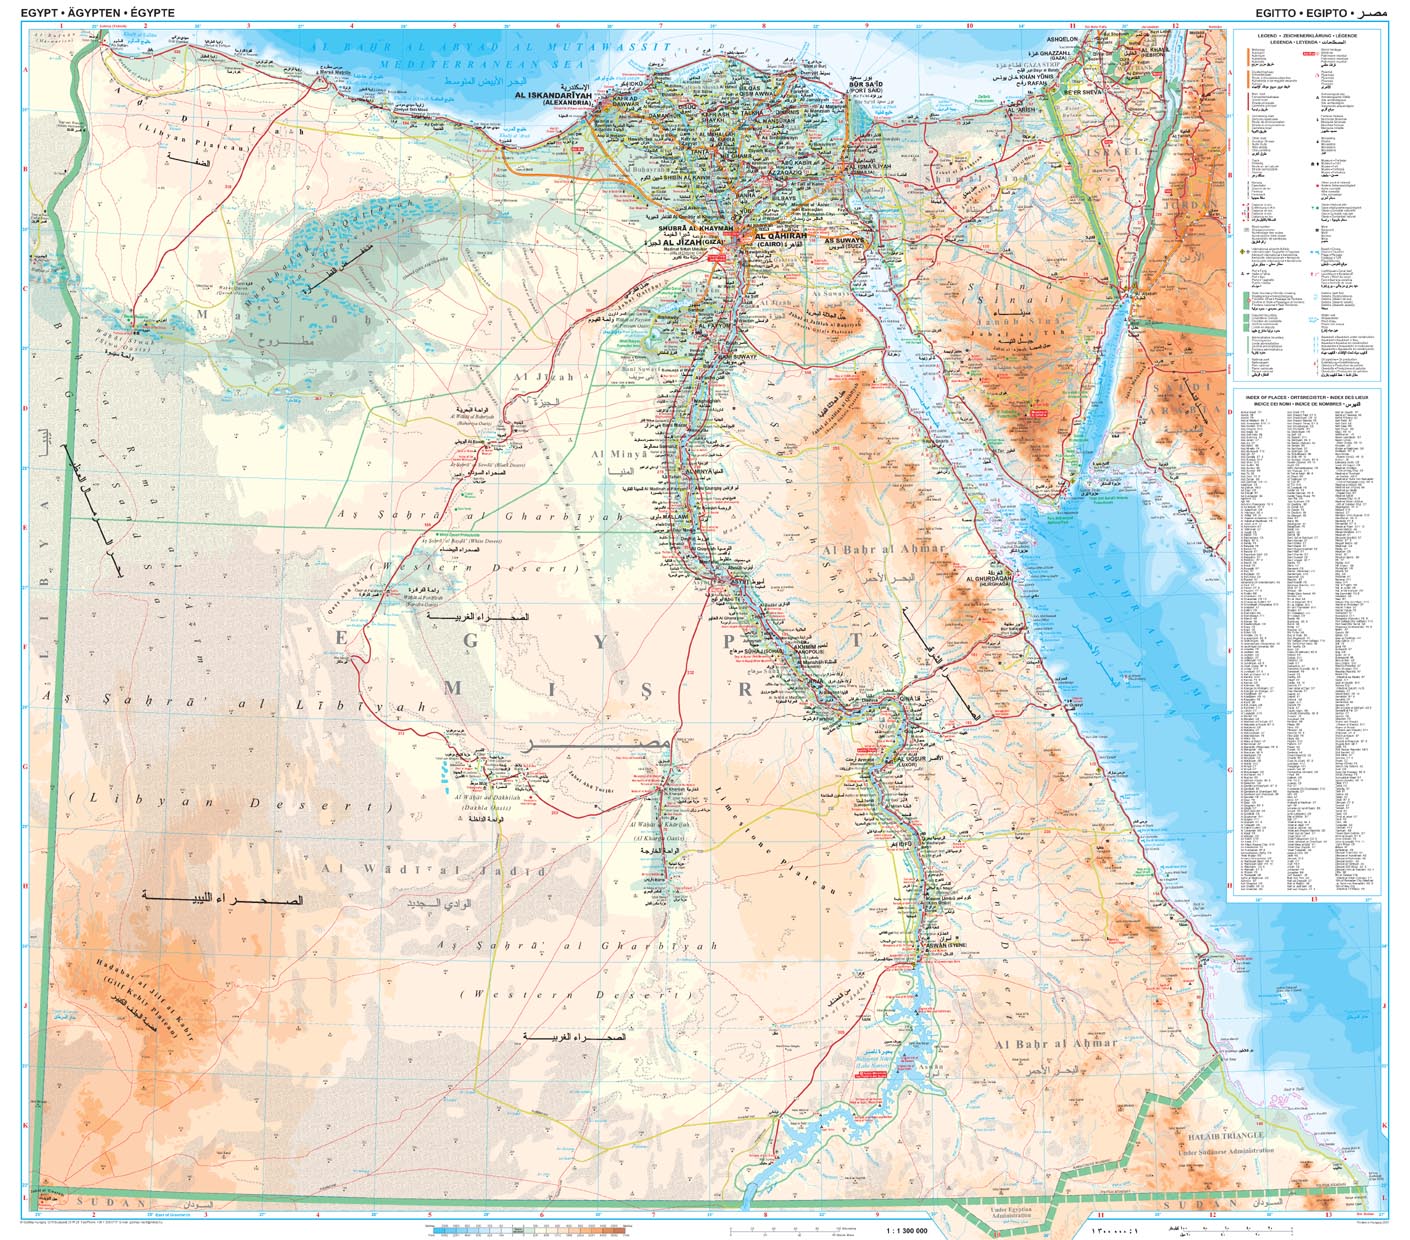 Egypt overview map